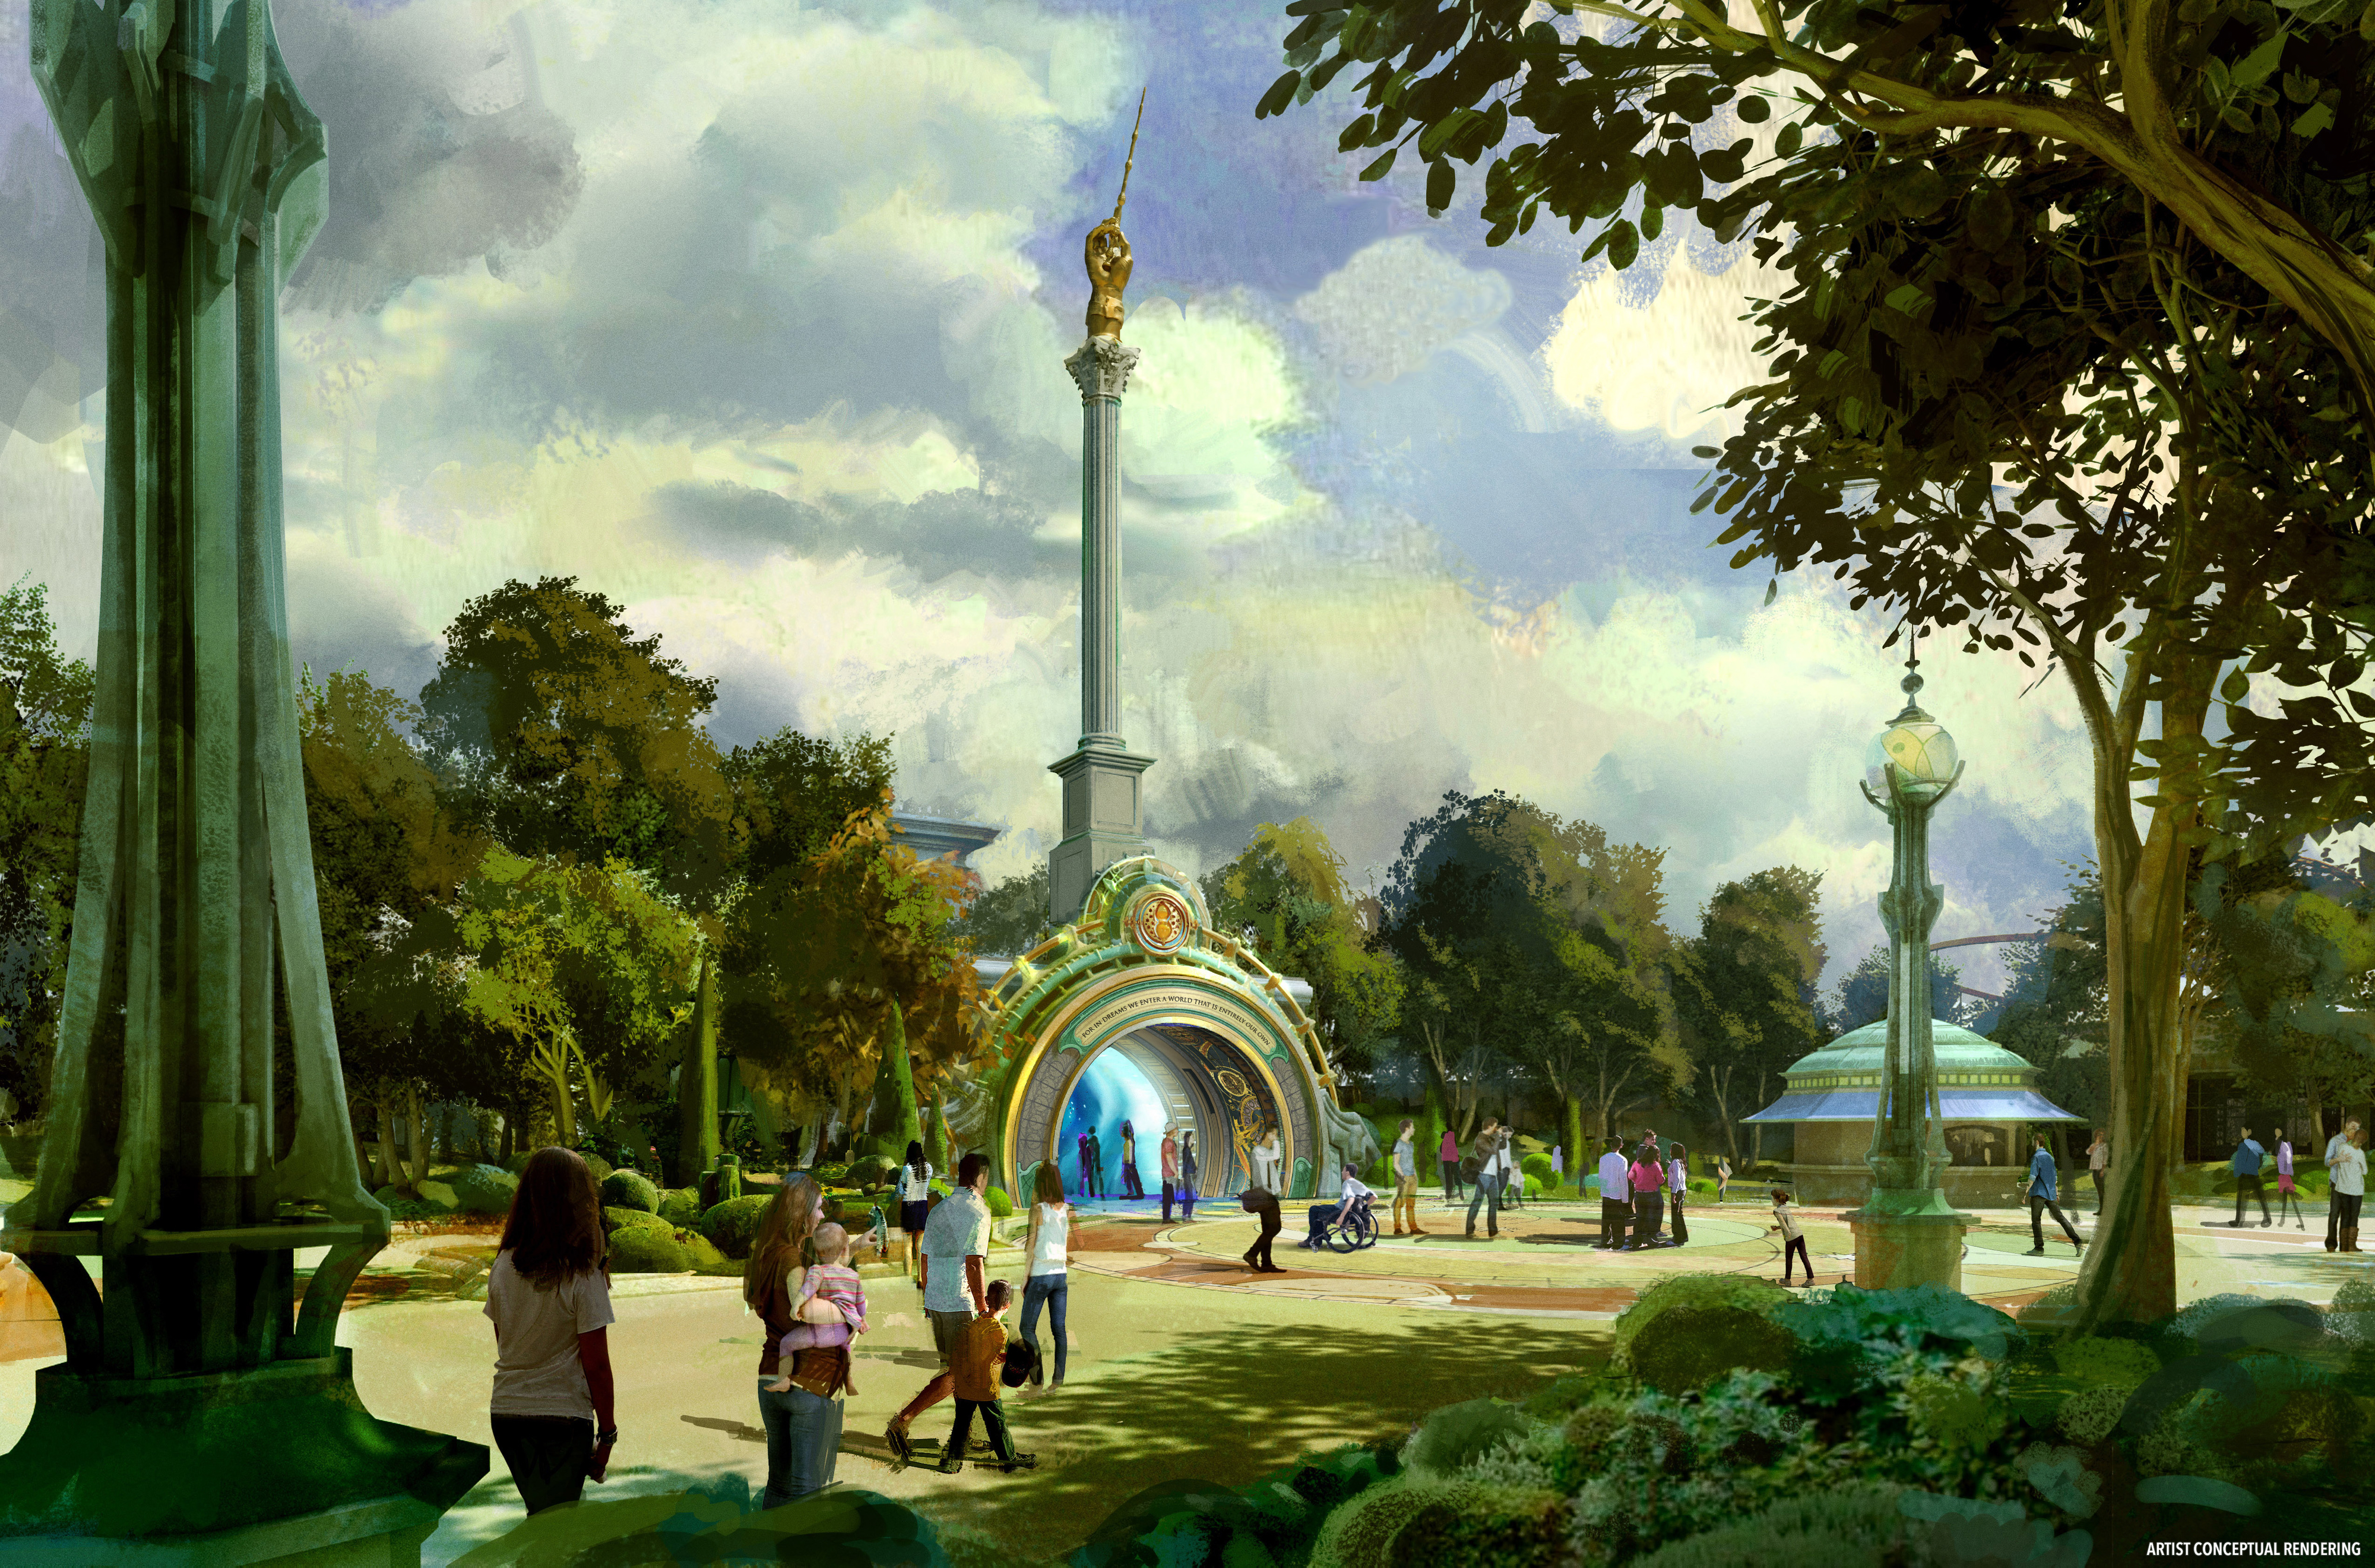 Rendering of the Harry Potter portion of the park